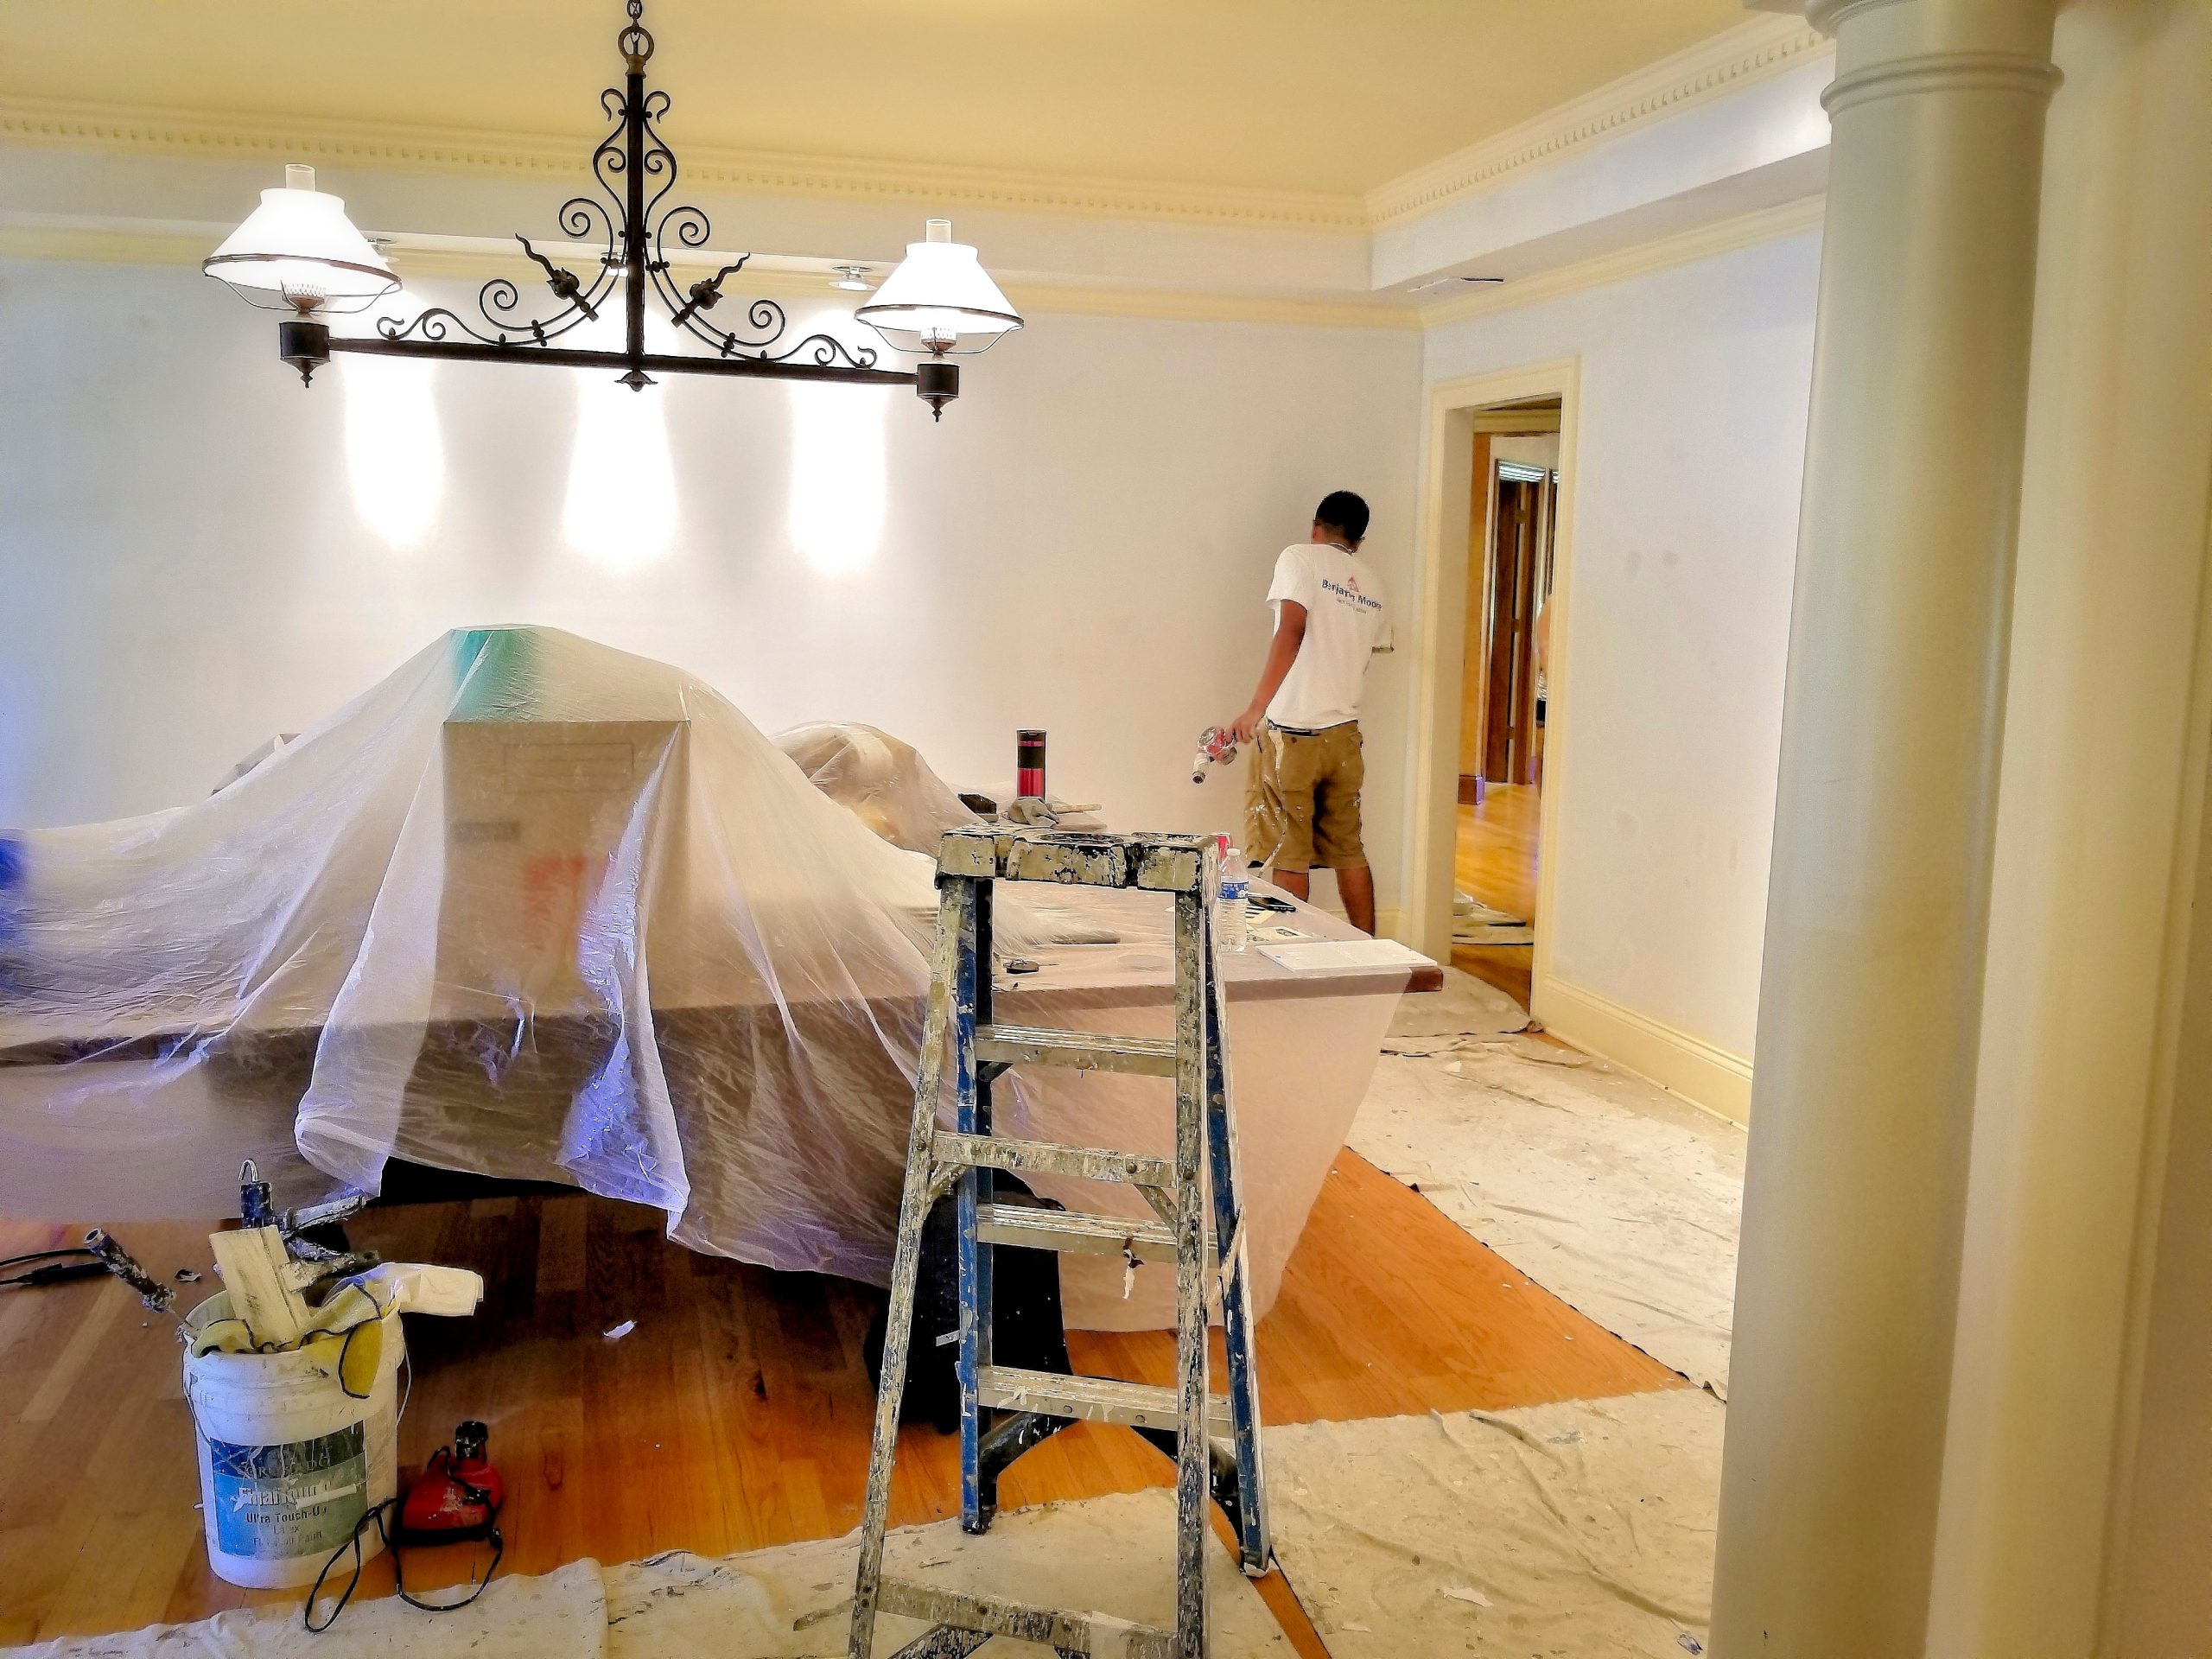 Painters Paint A Room During A Remodel 2022 10 31 09 05 17 Utc